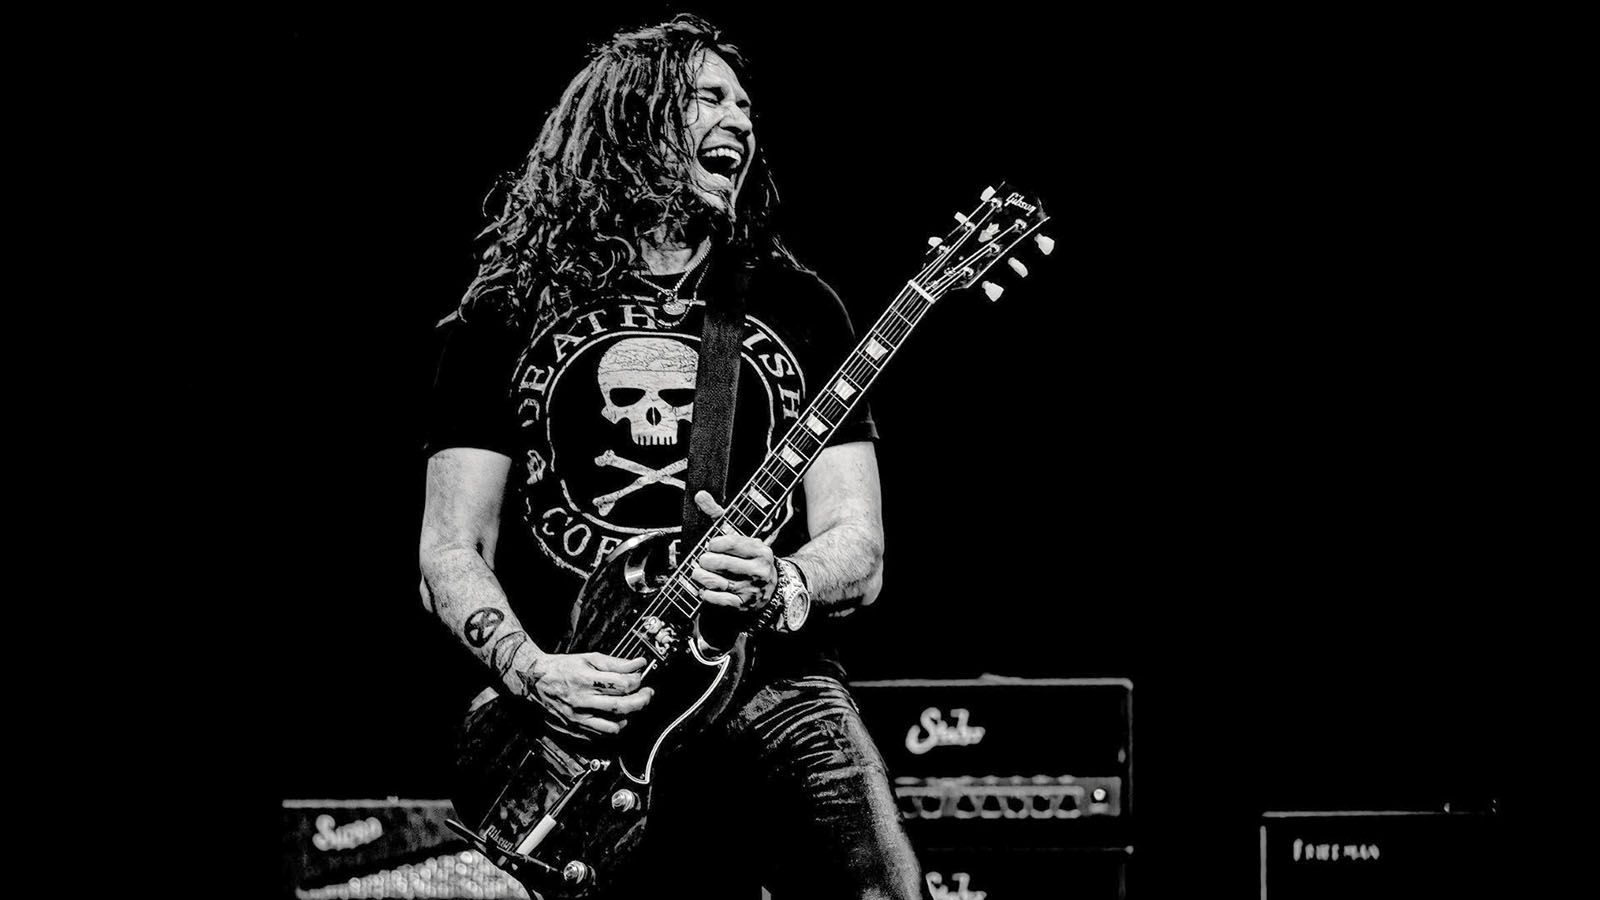 Phil X will teach a masterclass at Sweetwater Sound on Aug. 9.